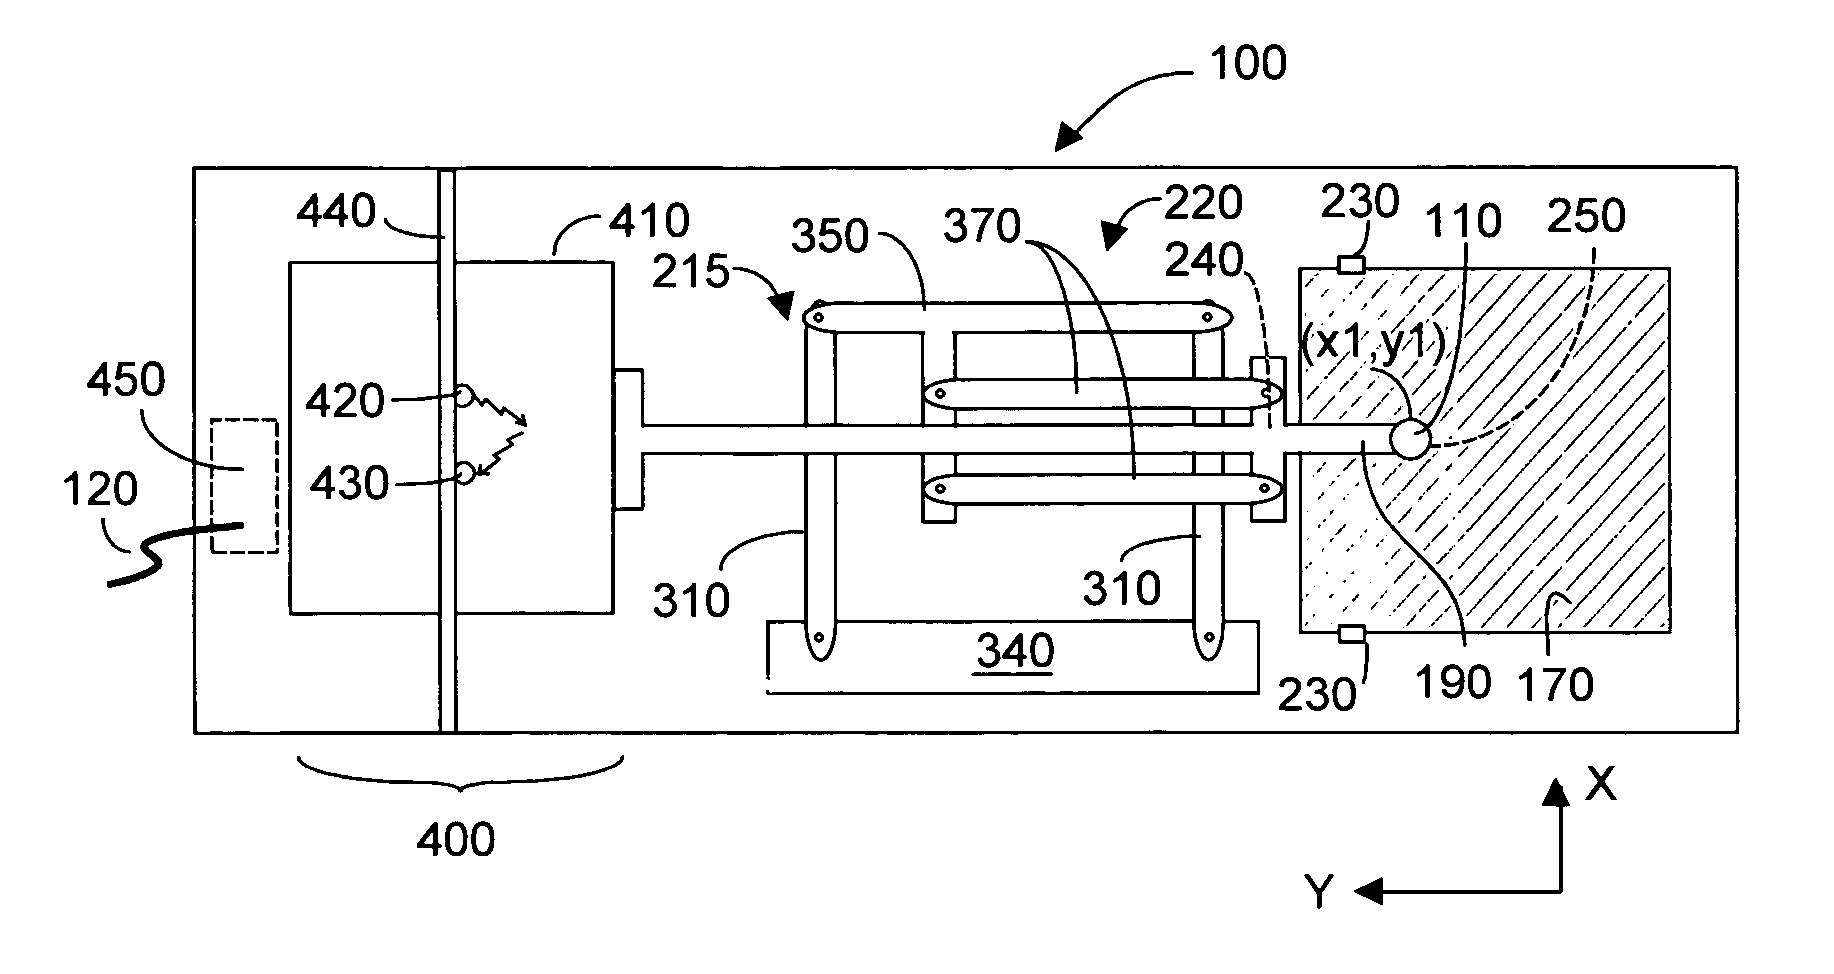 Absolute coordinate, single user-interface element pointing device